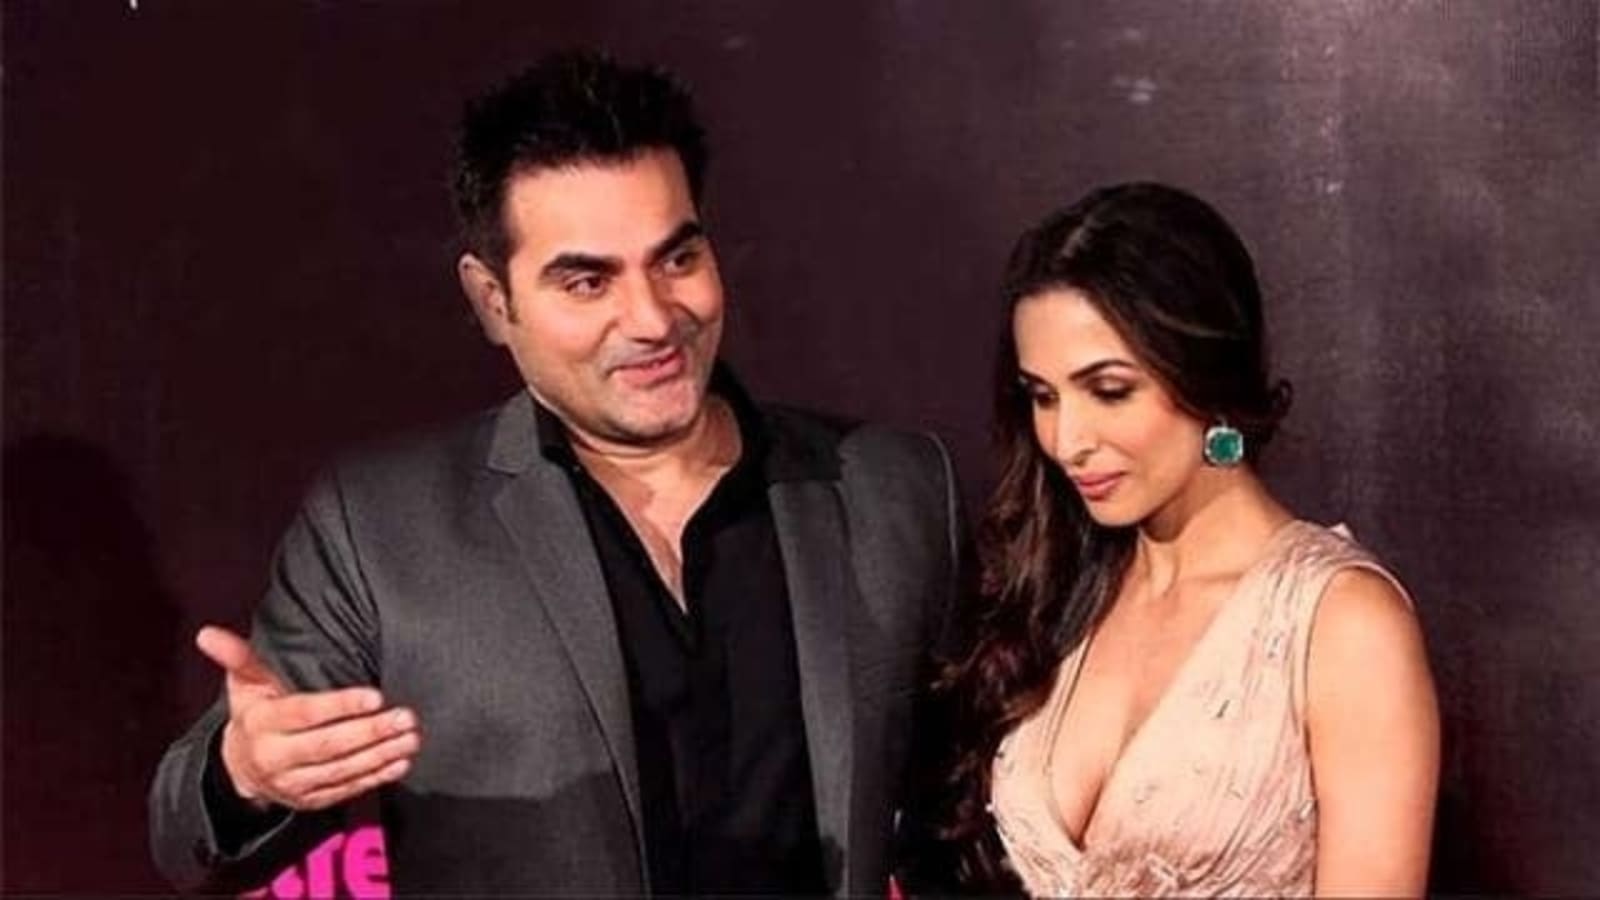 Malaika Arora says she has a better equation with Arbaaz Khan after divorce: ‘We’re just happier, calmer people’